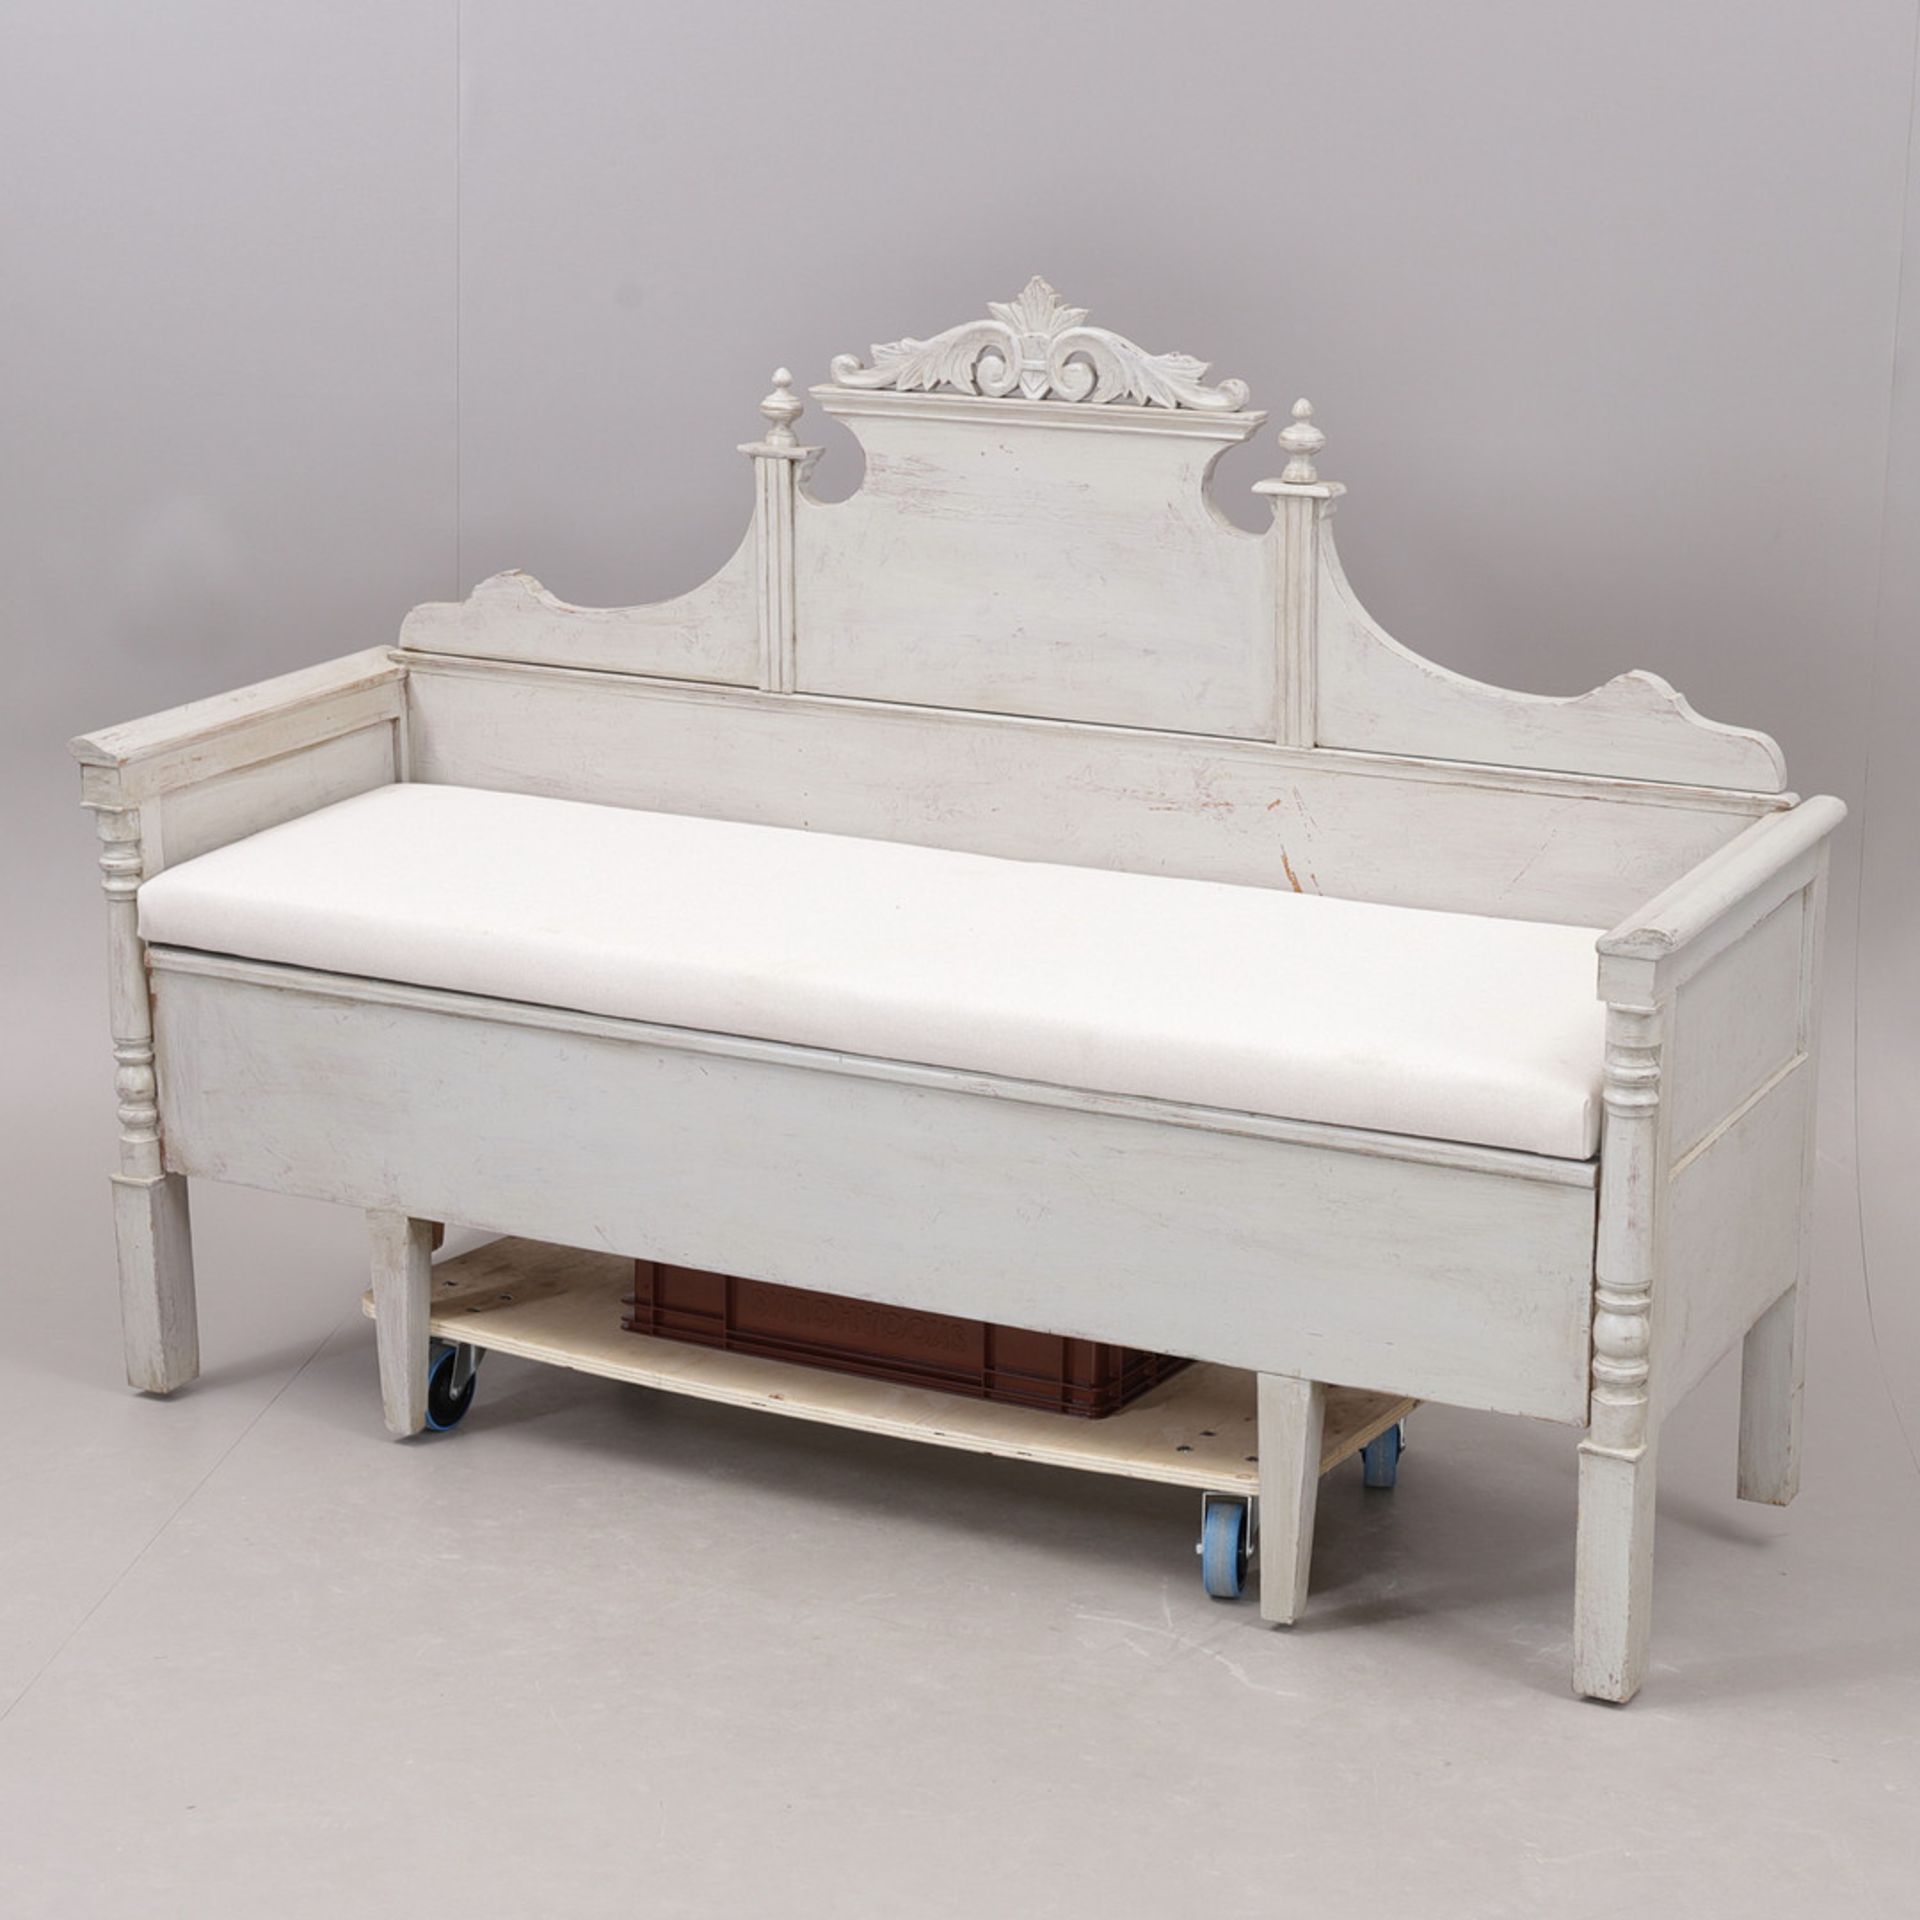 A 19TH CENTURY SWEDISH GUSTAVIAN PAINTED WOOD SETTLE - Image 2 of 4